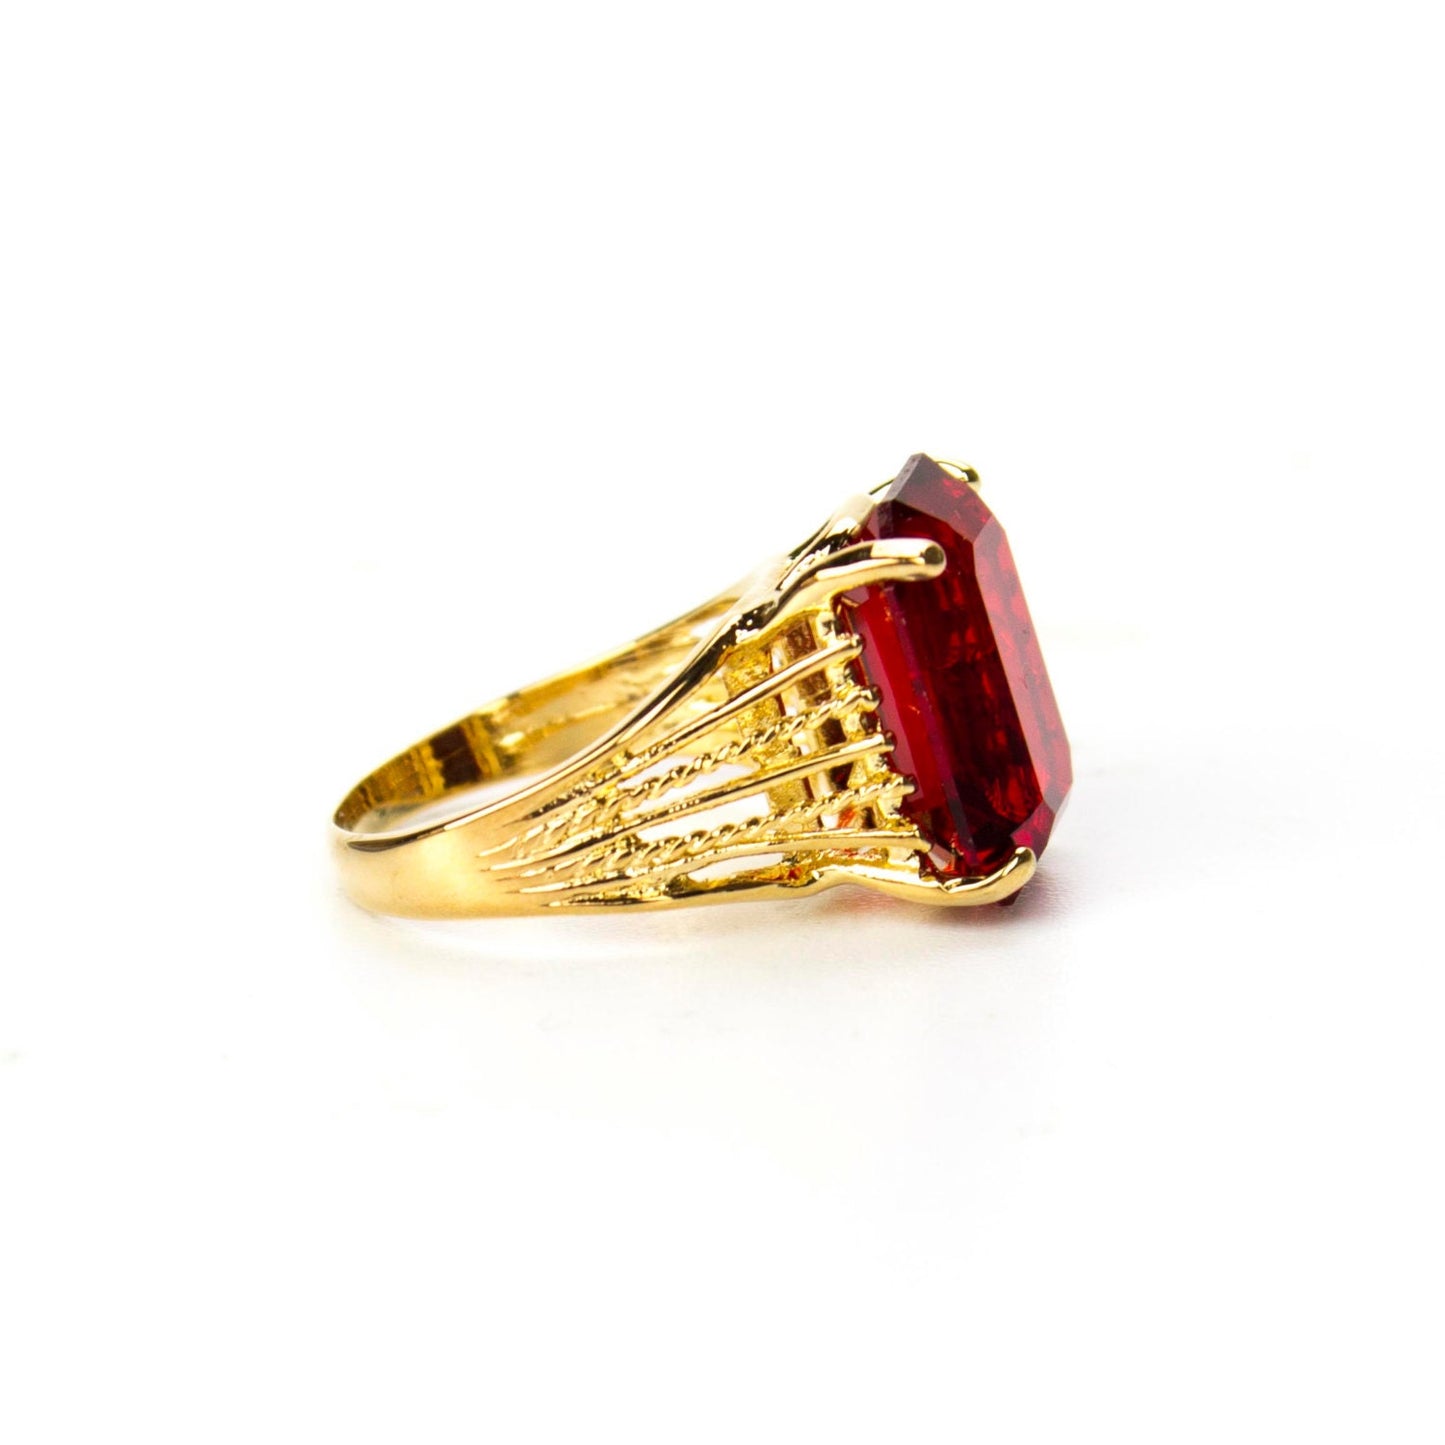 Vintage 1970s Ruby Austrian Crystal 18k Yellow Gold Electroplated Cocktail Ring Made in USA #R694